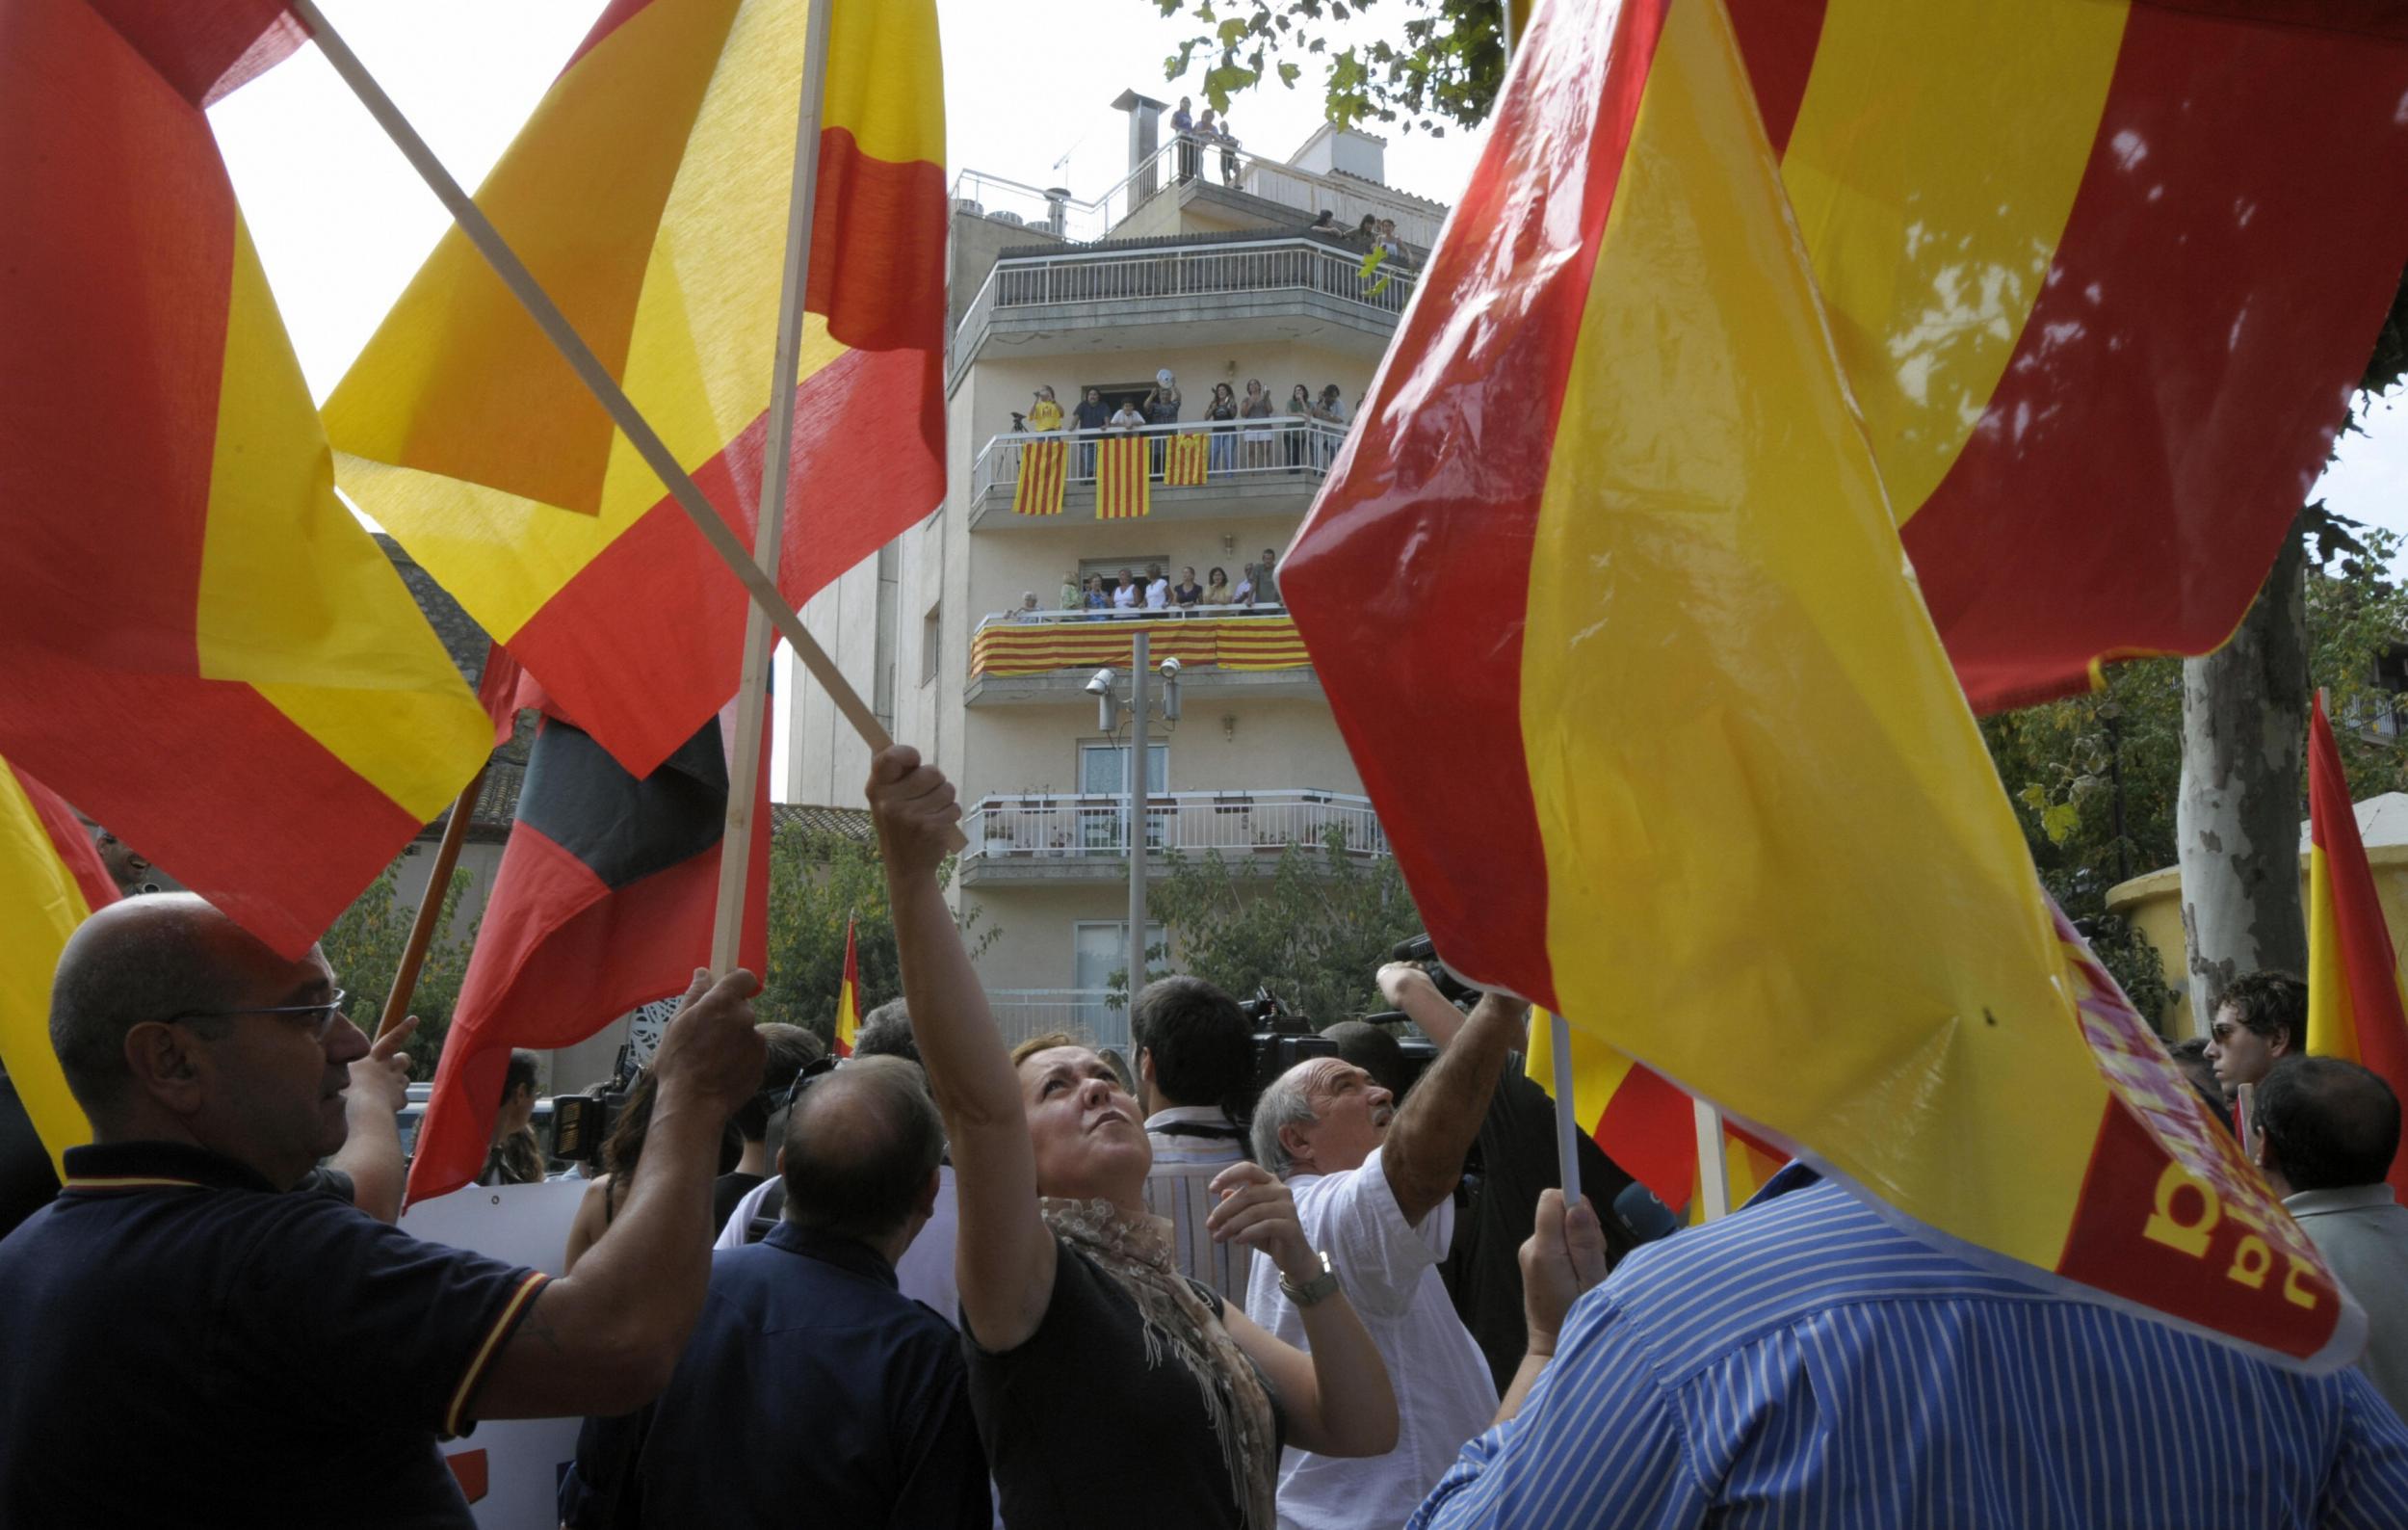 Scenes from the unofficial 2009 referendum in Arenys de Munt where far-right protesters tried to stop a vote on self-determination